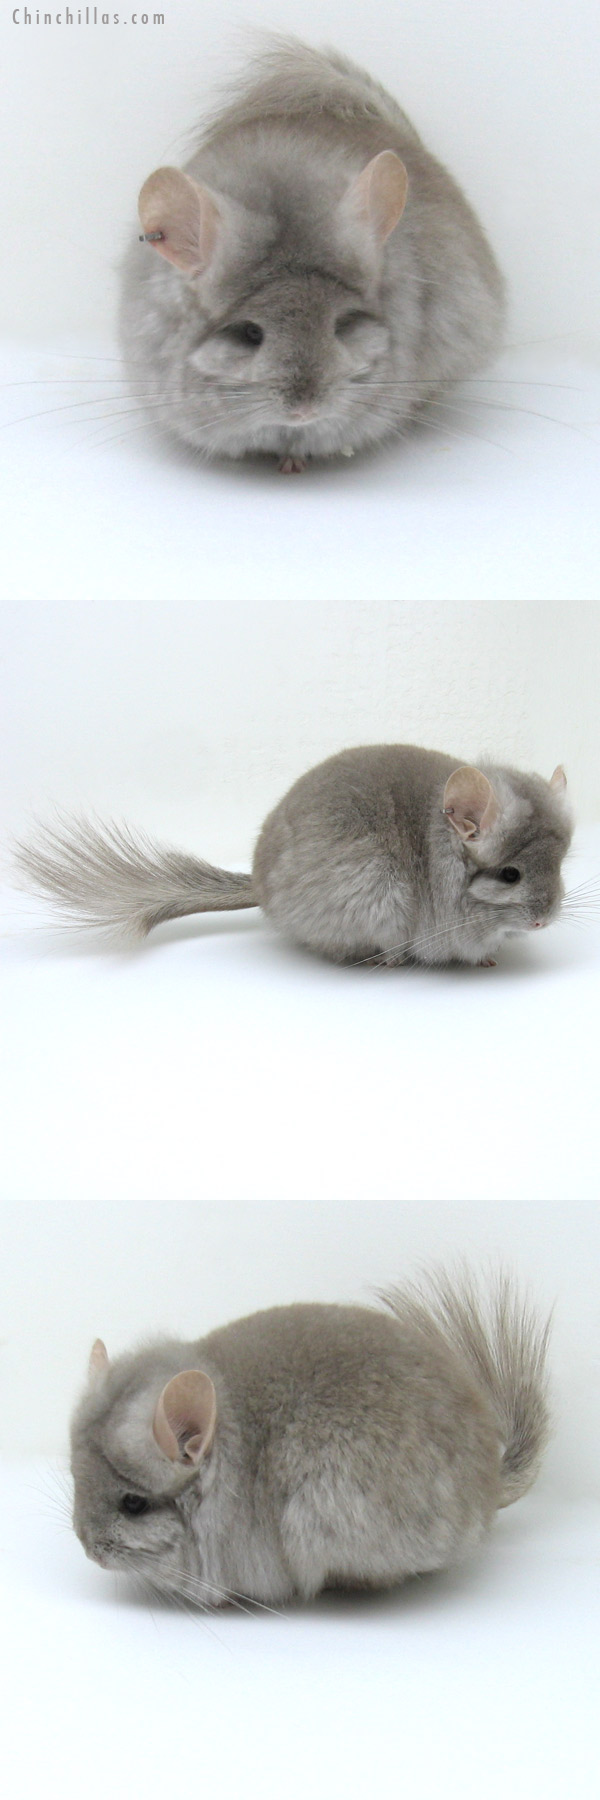 Chinchilla or related item offered for sale or export on Chinchillas.com - 12009 Exceptional Beige Royal Persian Angora Female Chinchilla